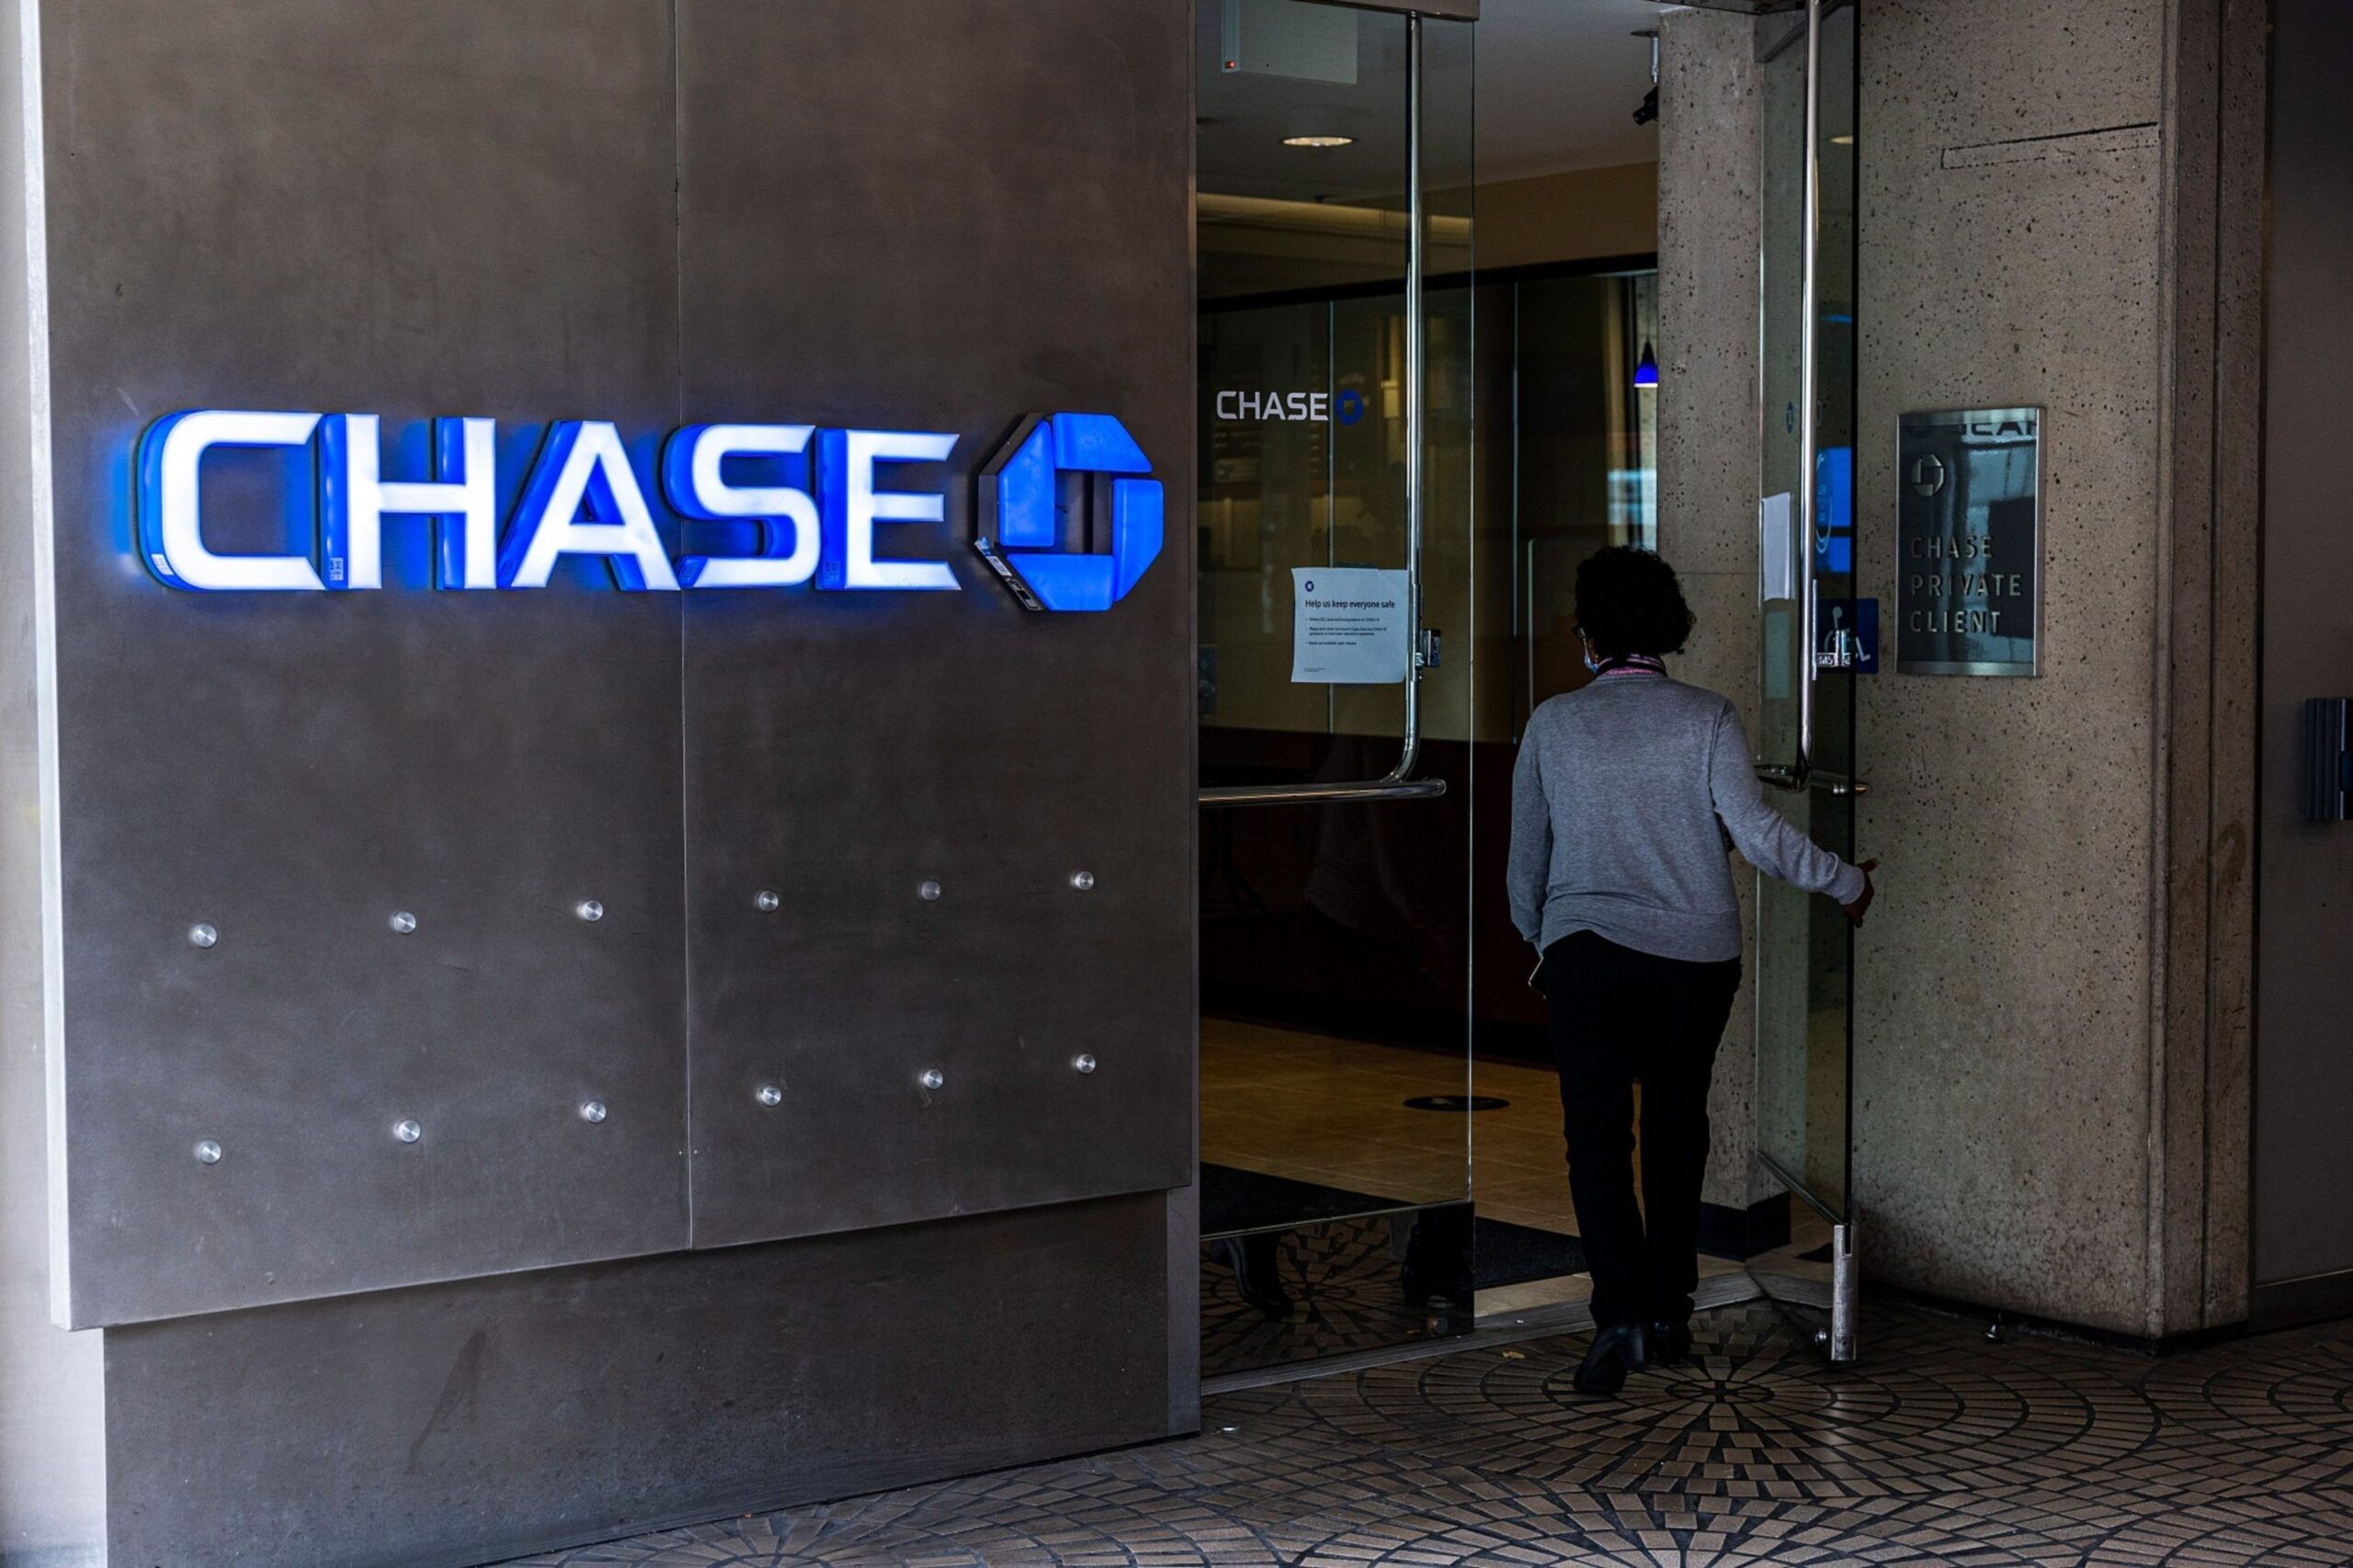 A customer enters a Chase bank branch in San Francisco, California, U.S., on Monday, July 12, 2021. JPMorgan Chase & Co. is expected to release earnings figures on July 13. Photographer: David Paul Morris/Bloomberg